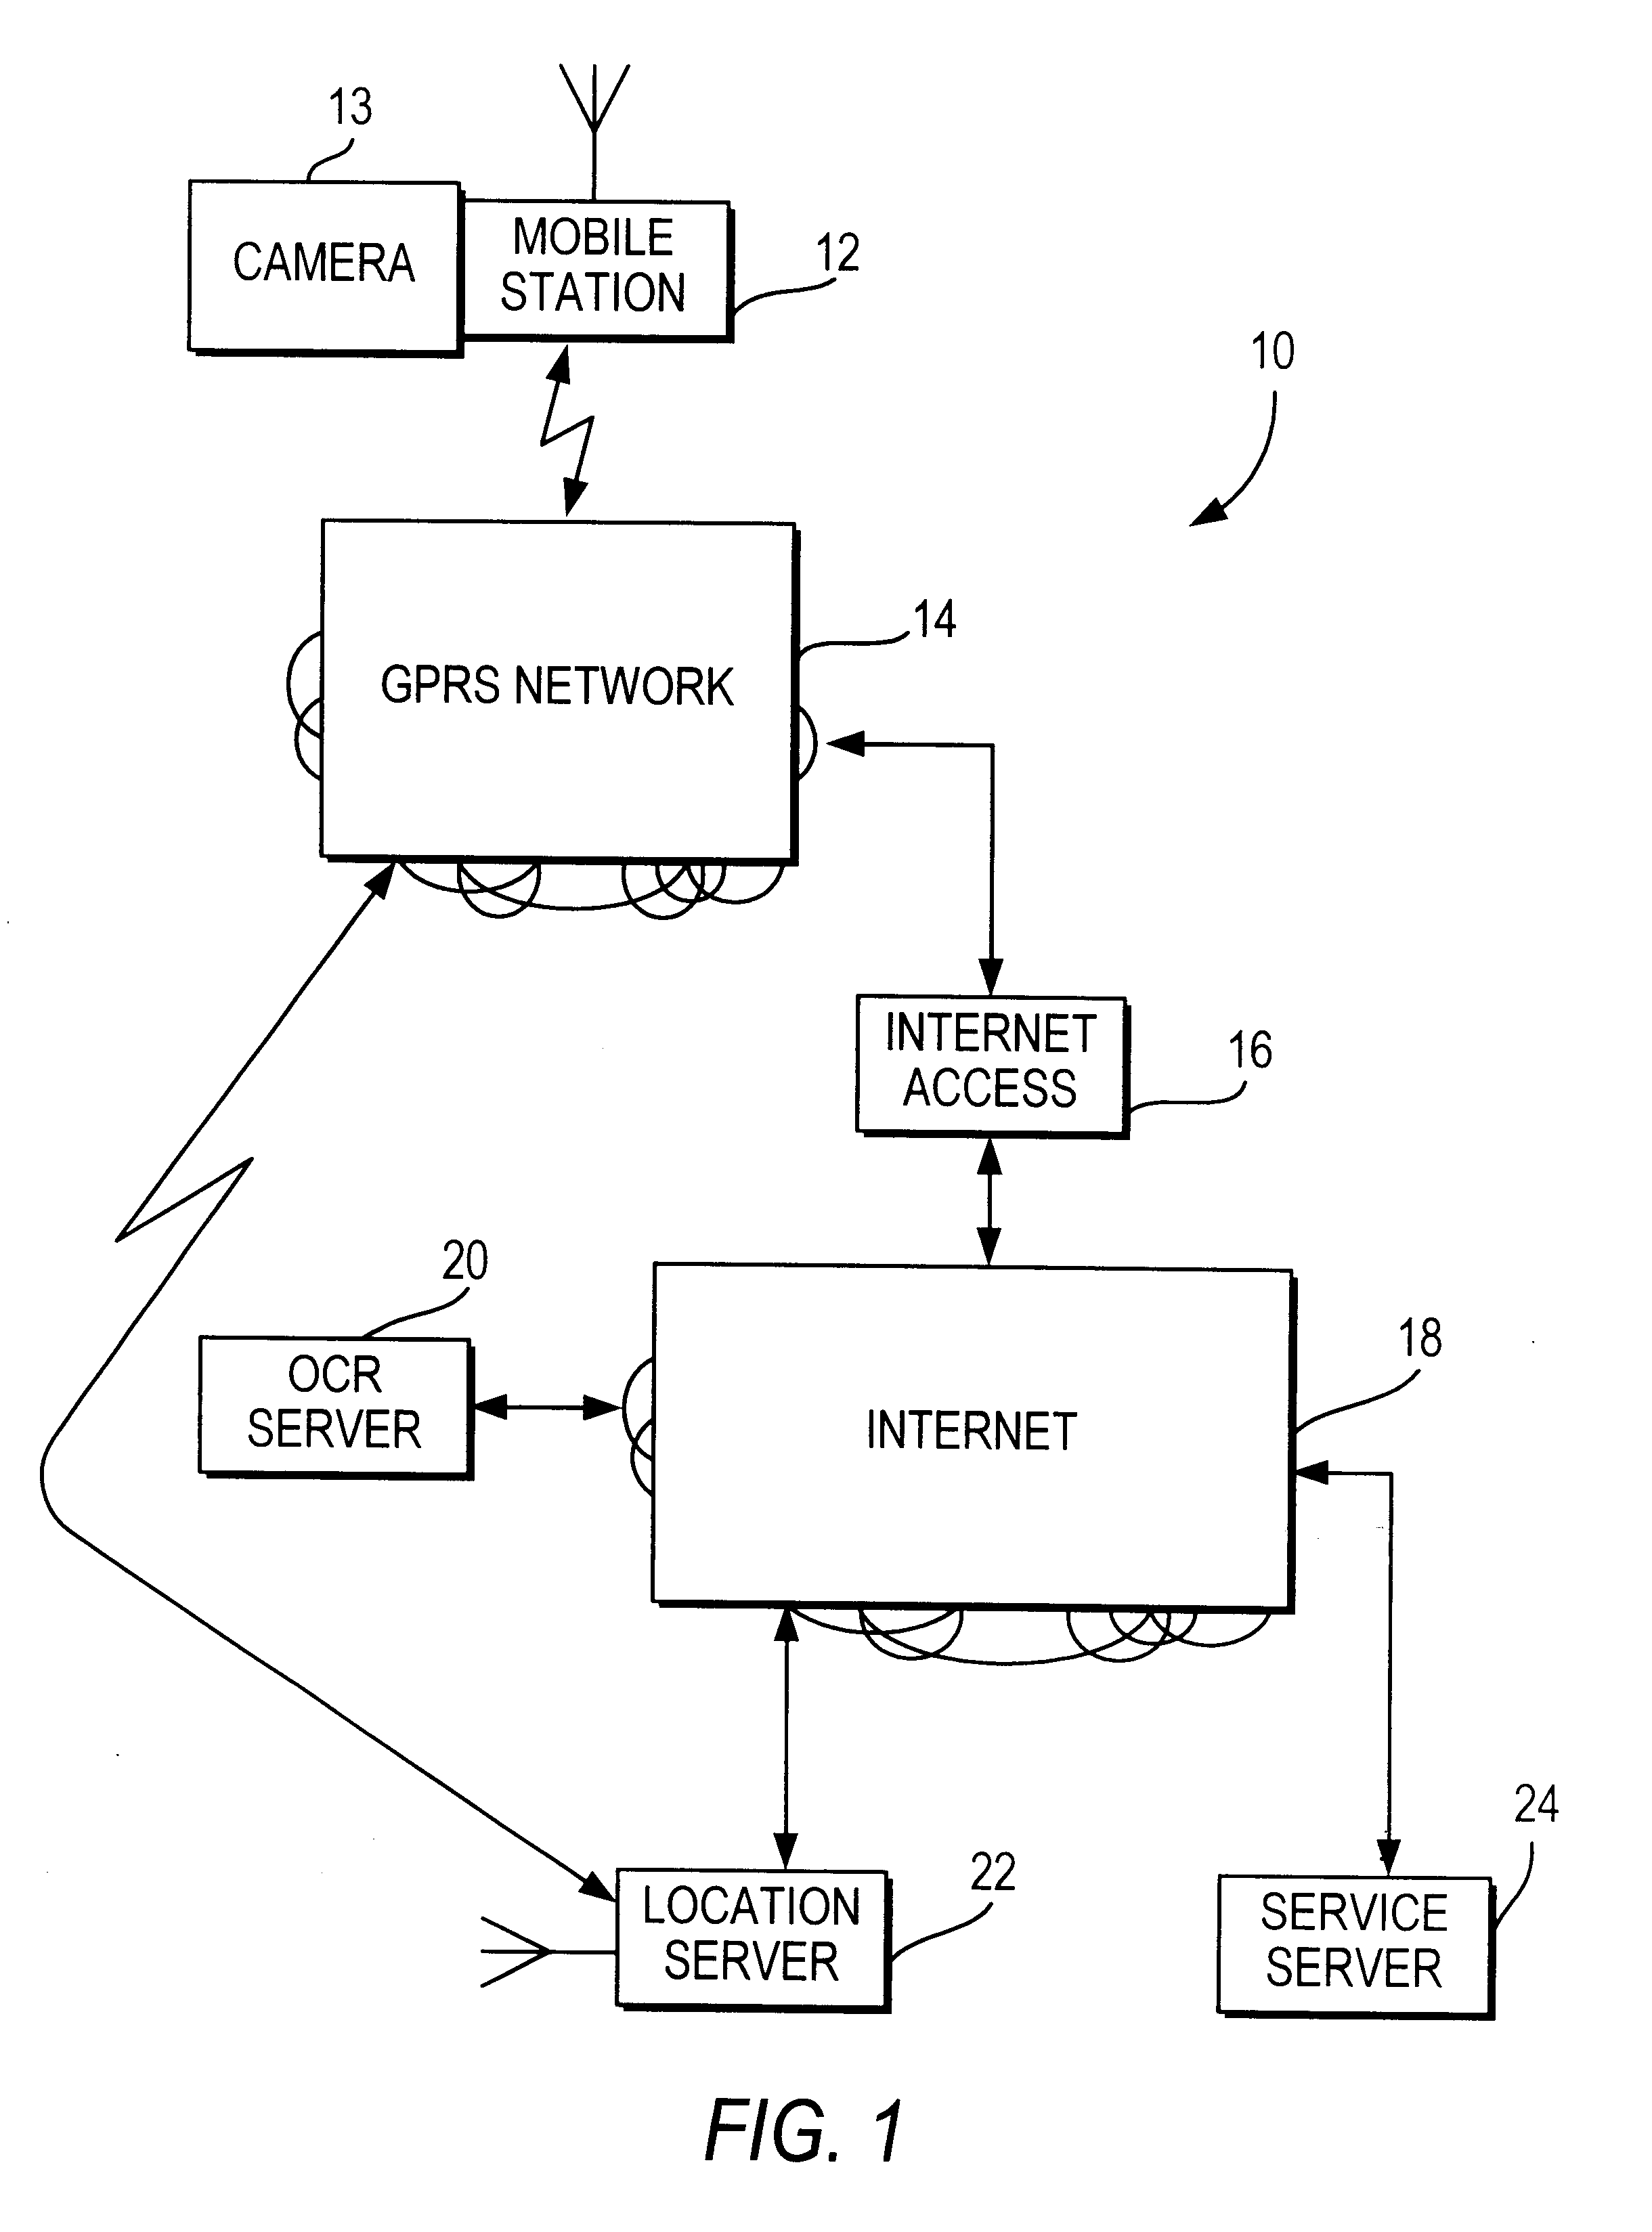 Method and apparatus for providing precise location information through a communications network